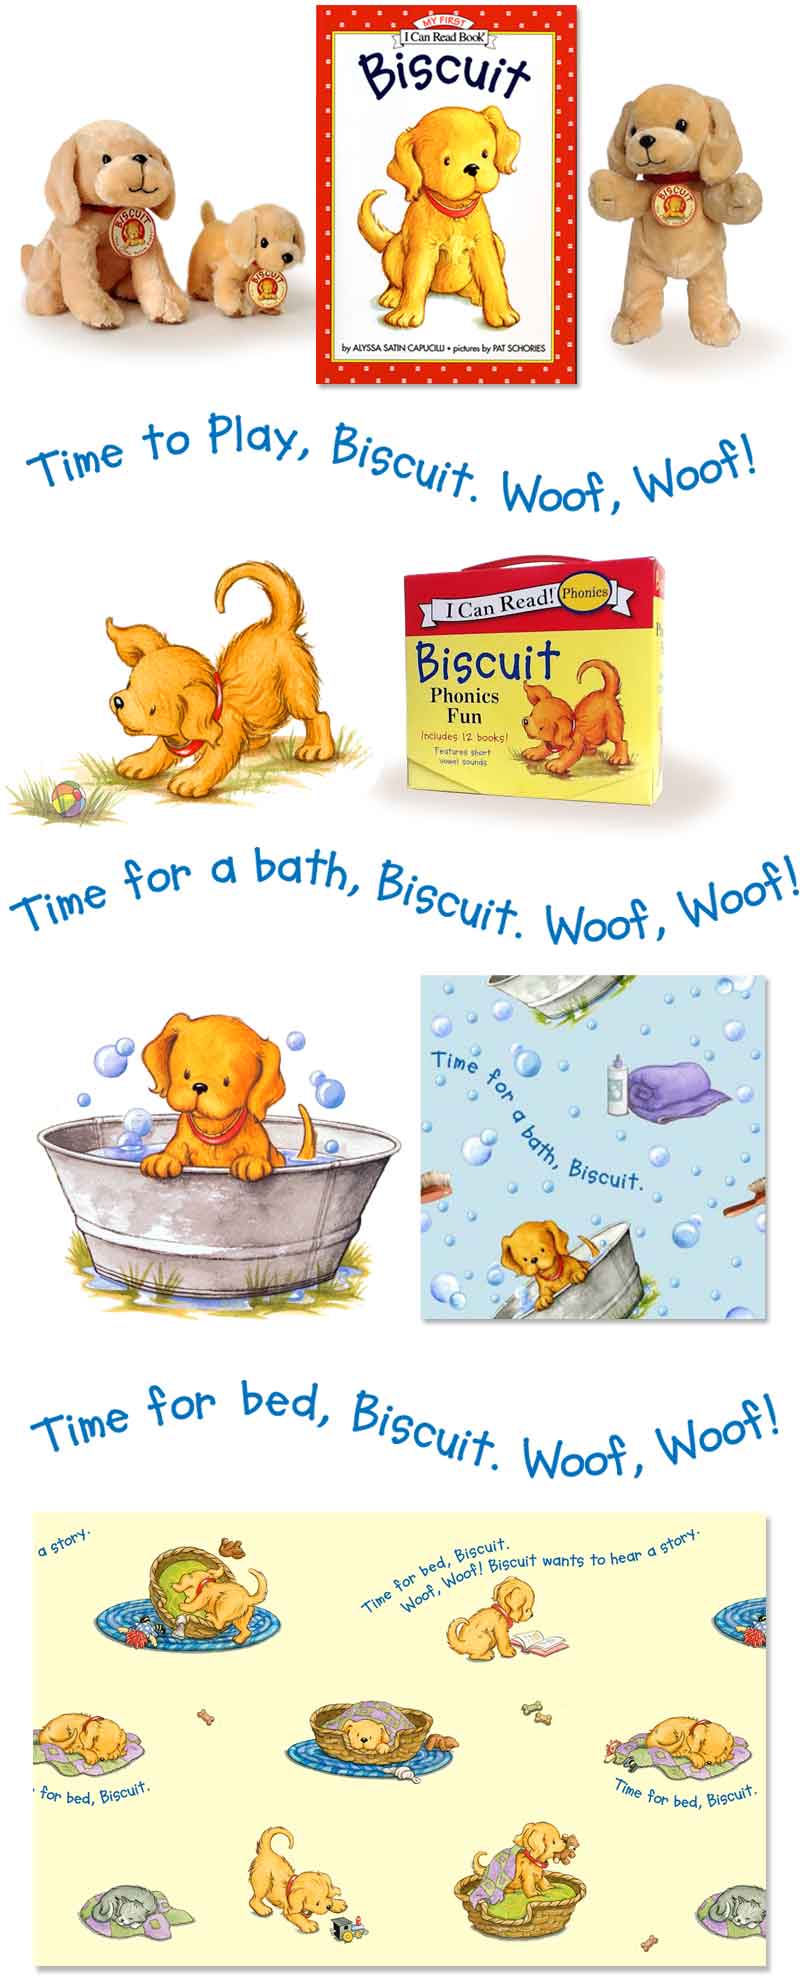 images of Biscuit products